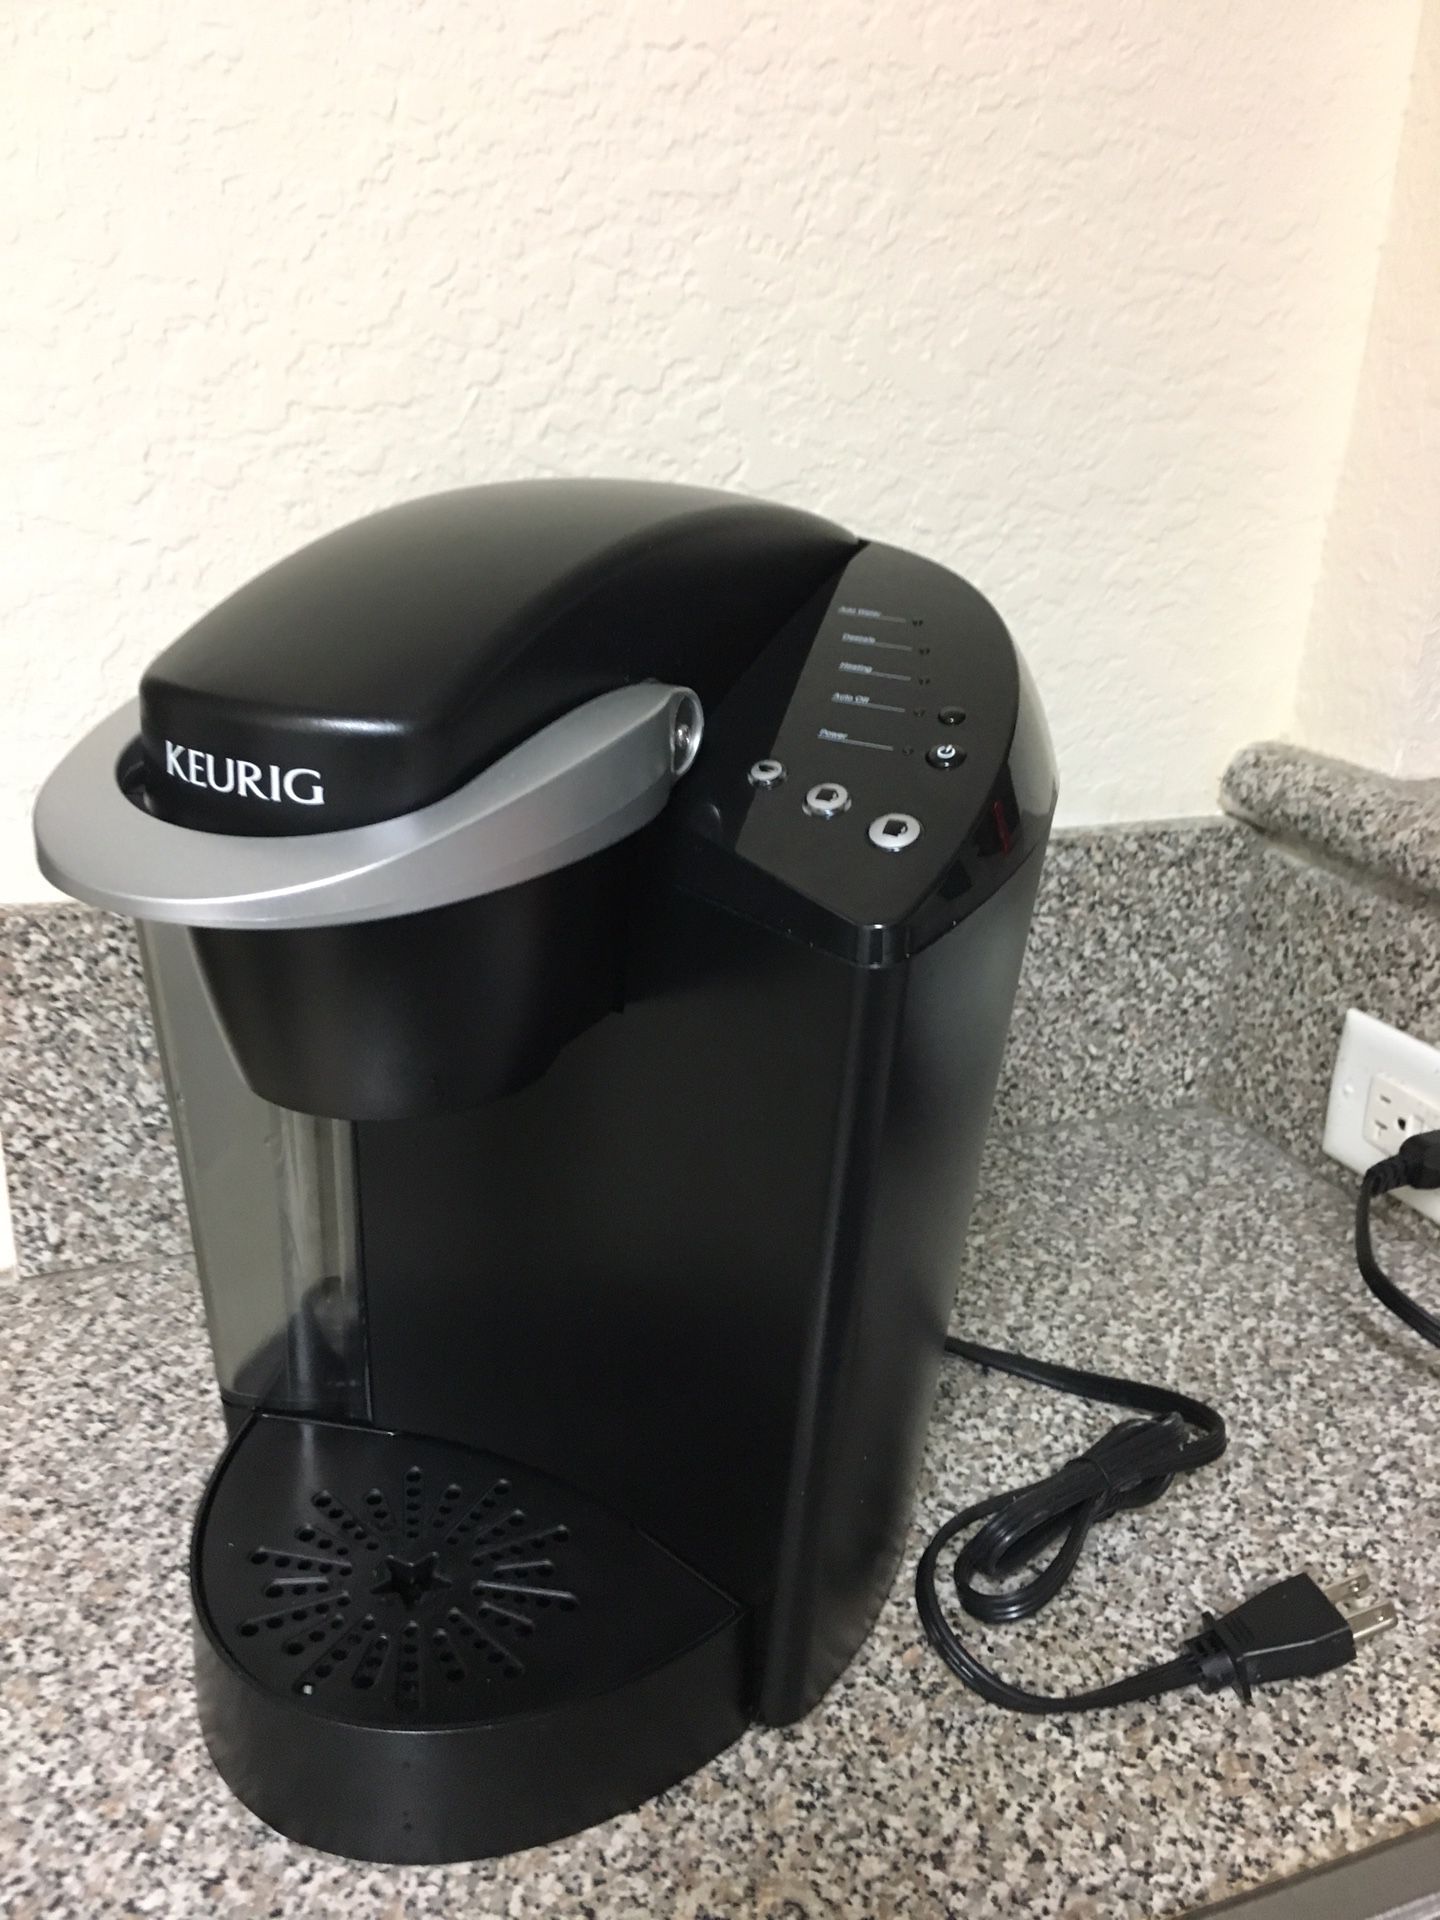 Keurig K40 used in perfect working condition